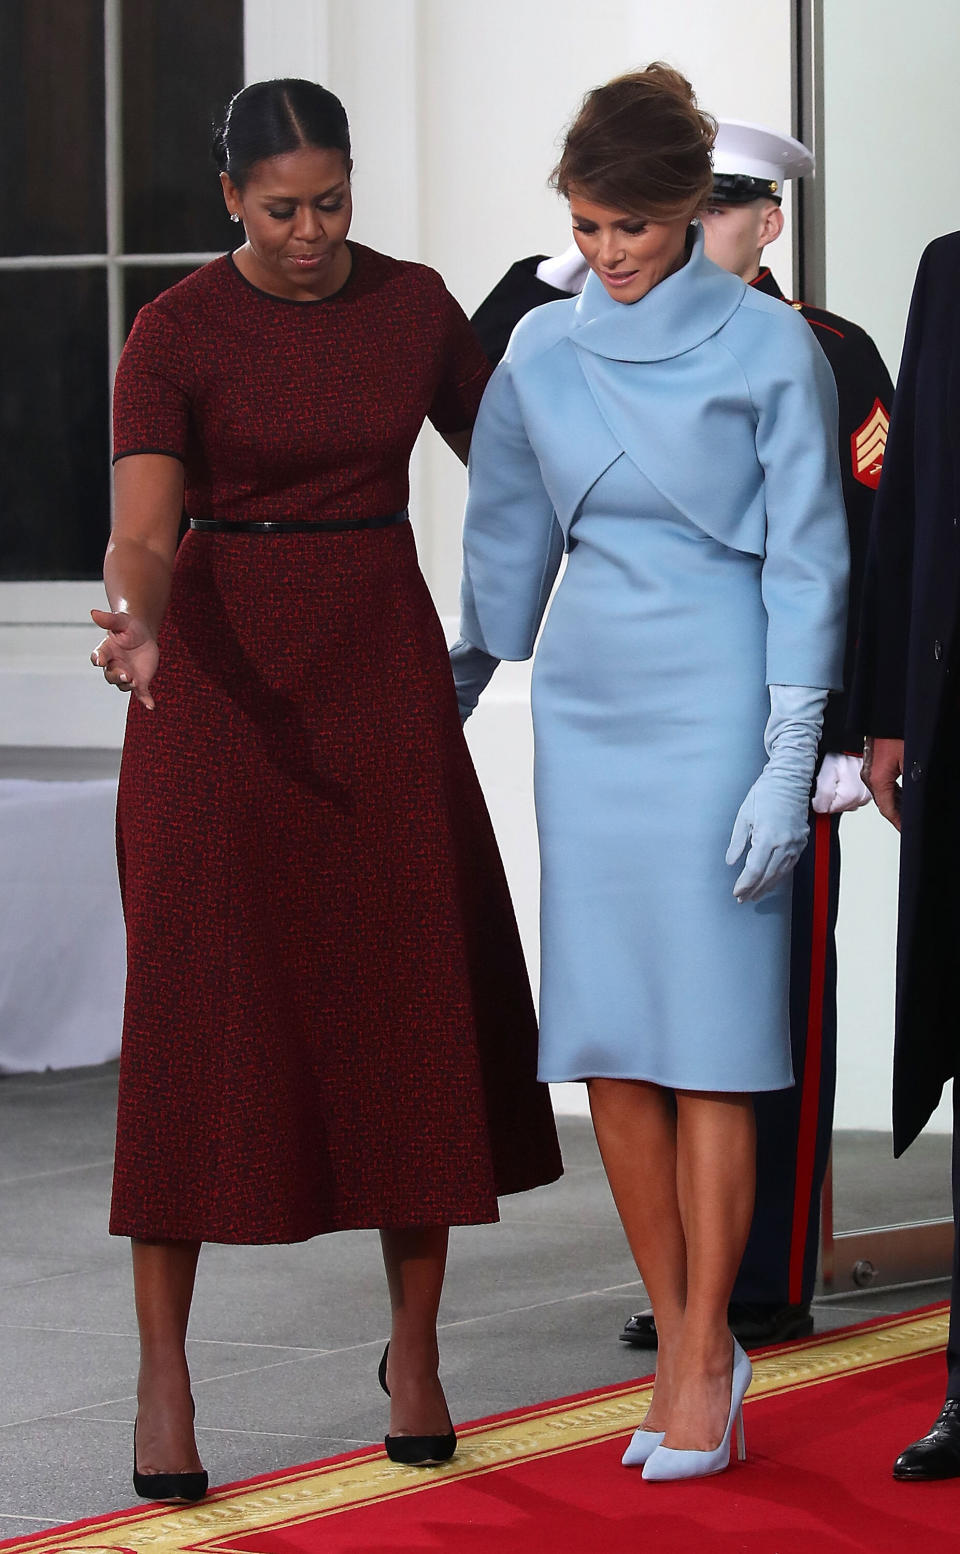 The outgoing first lady guides Melania Trump on a red carpet at the White House the morning of Donald Trump's 2017 inauguration.